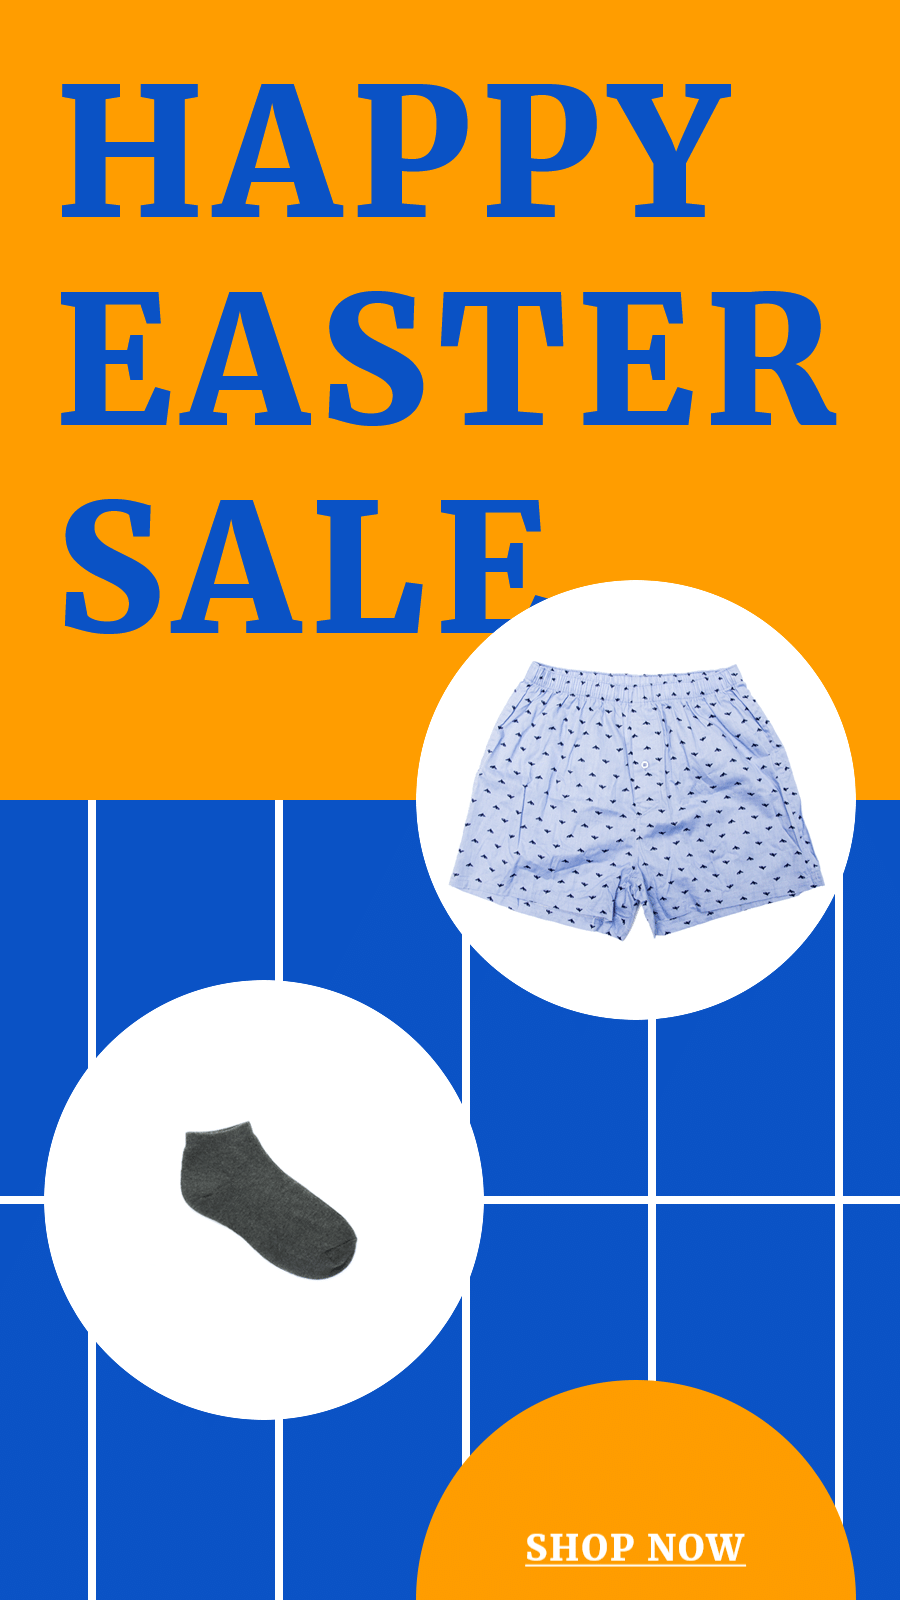 Men's Pajama Sports Wear Easter Sale Ecommerce Story